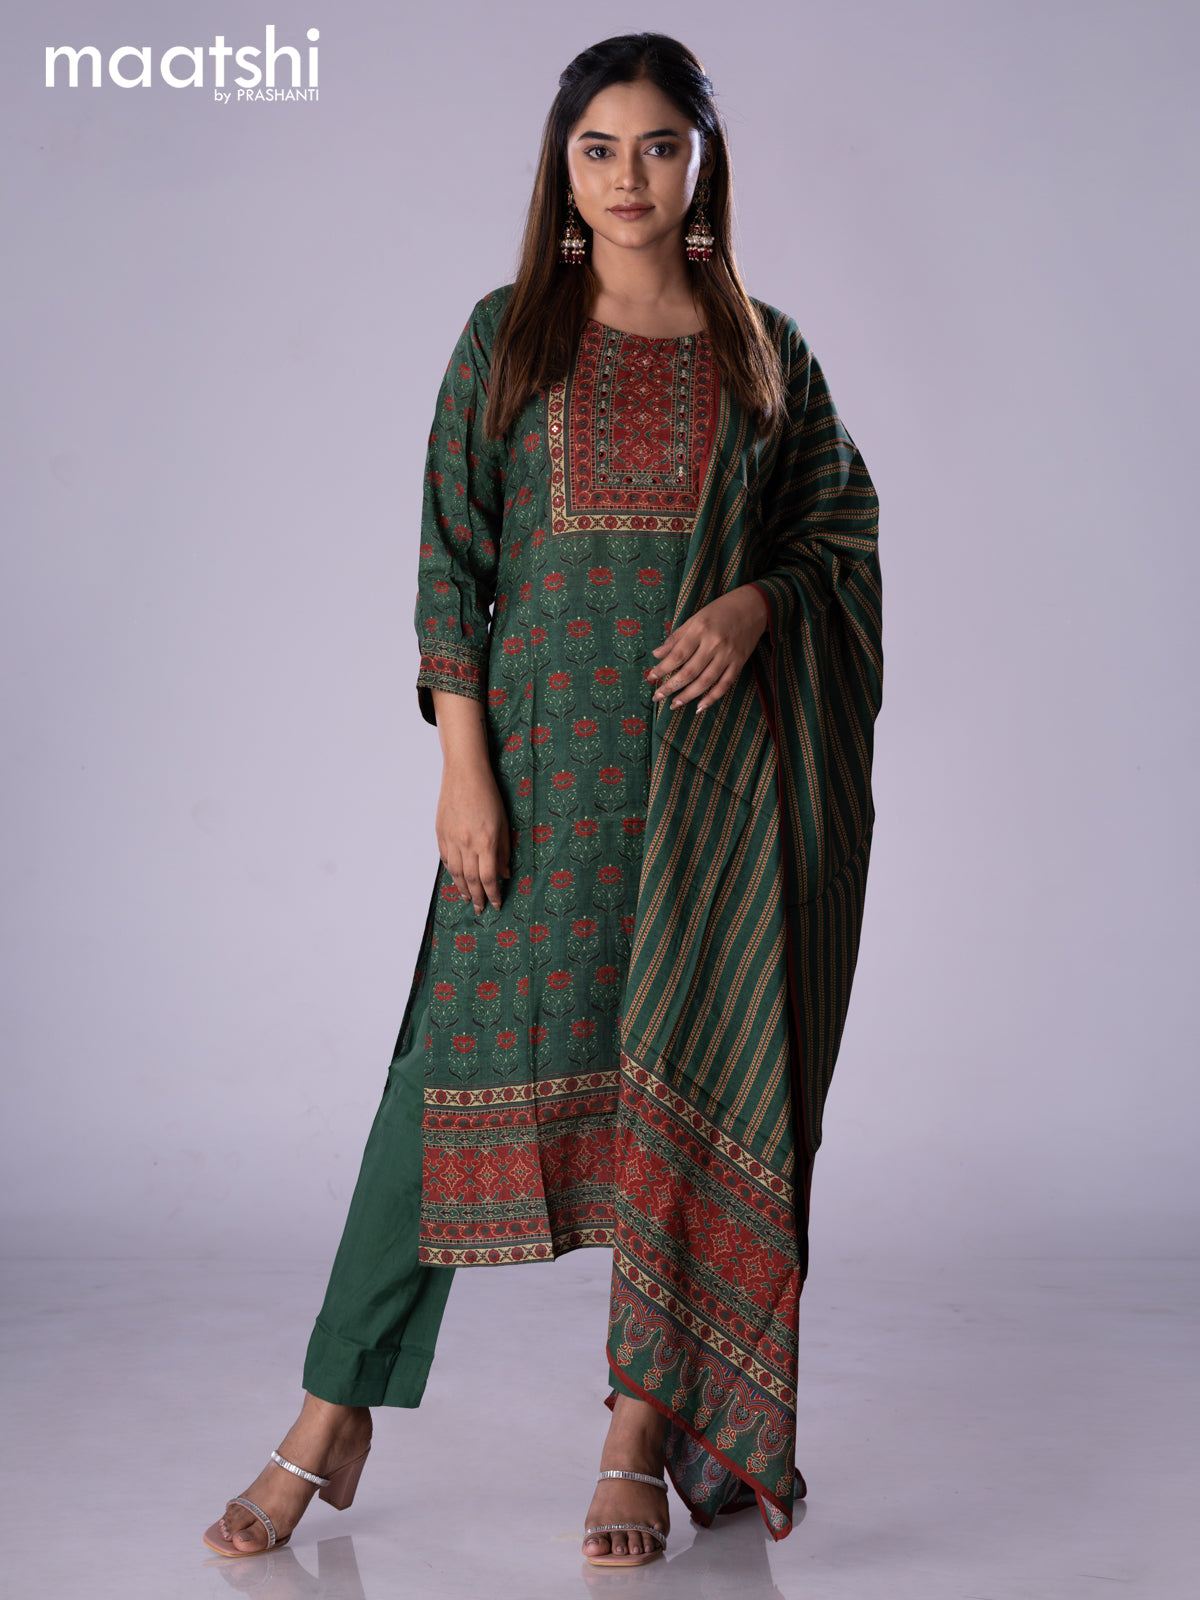 Modal readymade salwar suit green and maroon with allover floral prints & embroidery work neck pattern and straight cut pant & printed dupatta